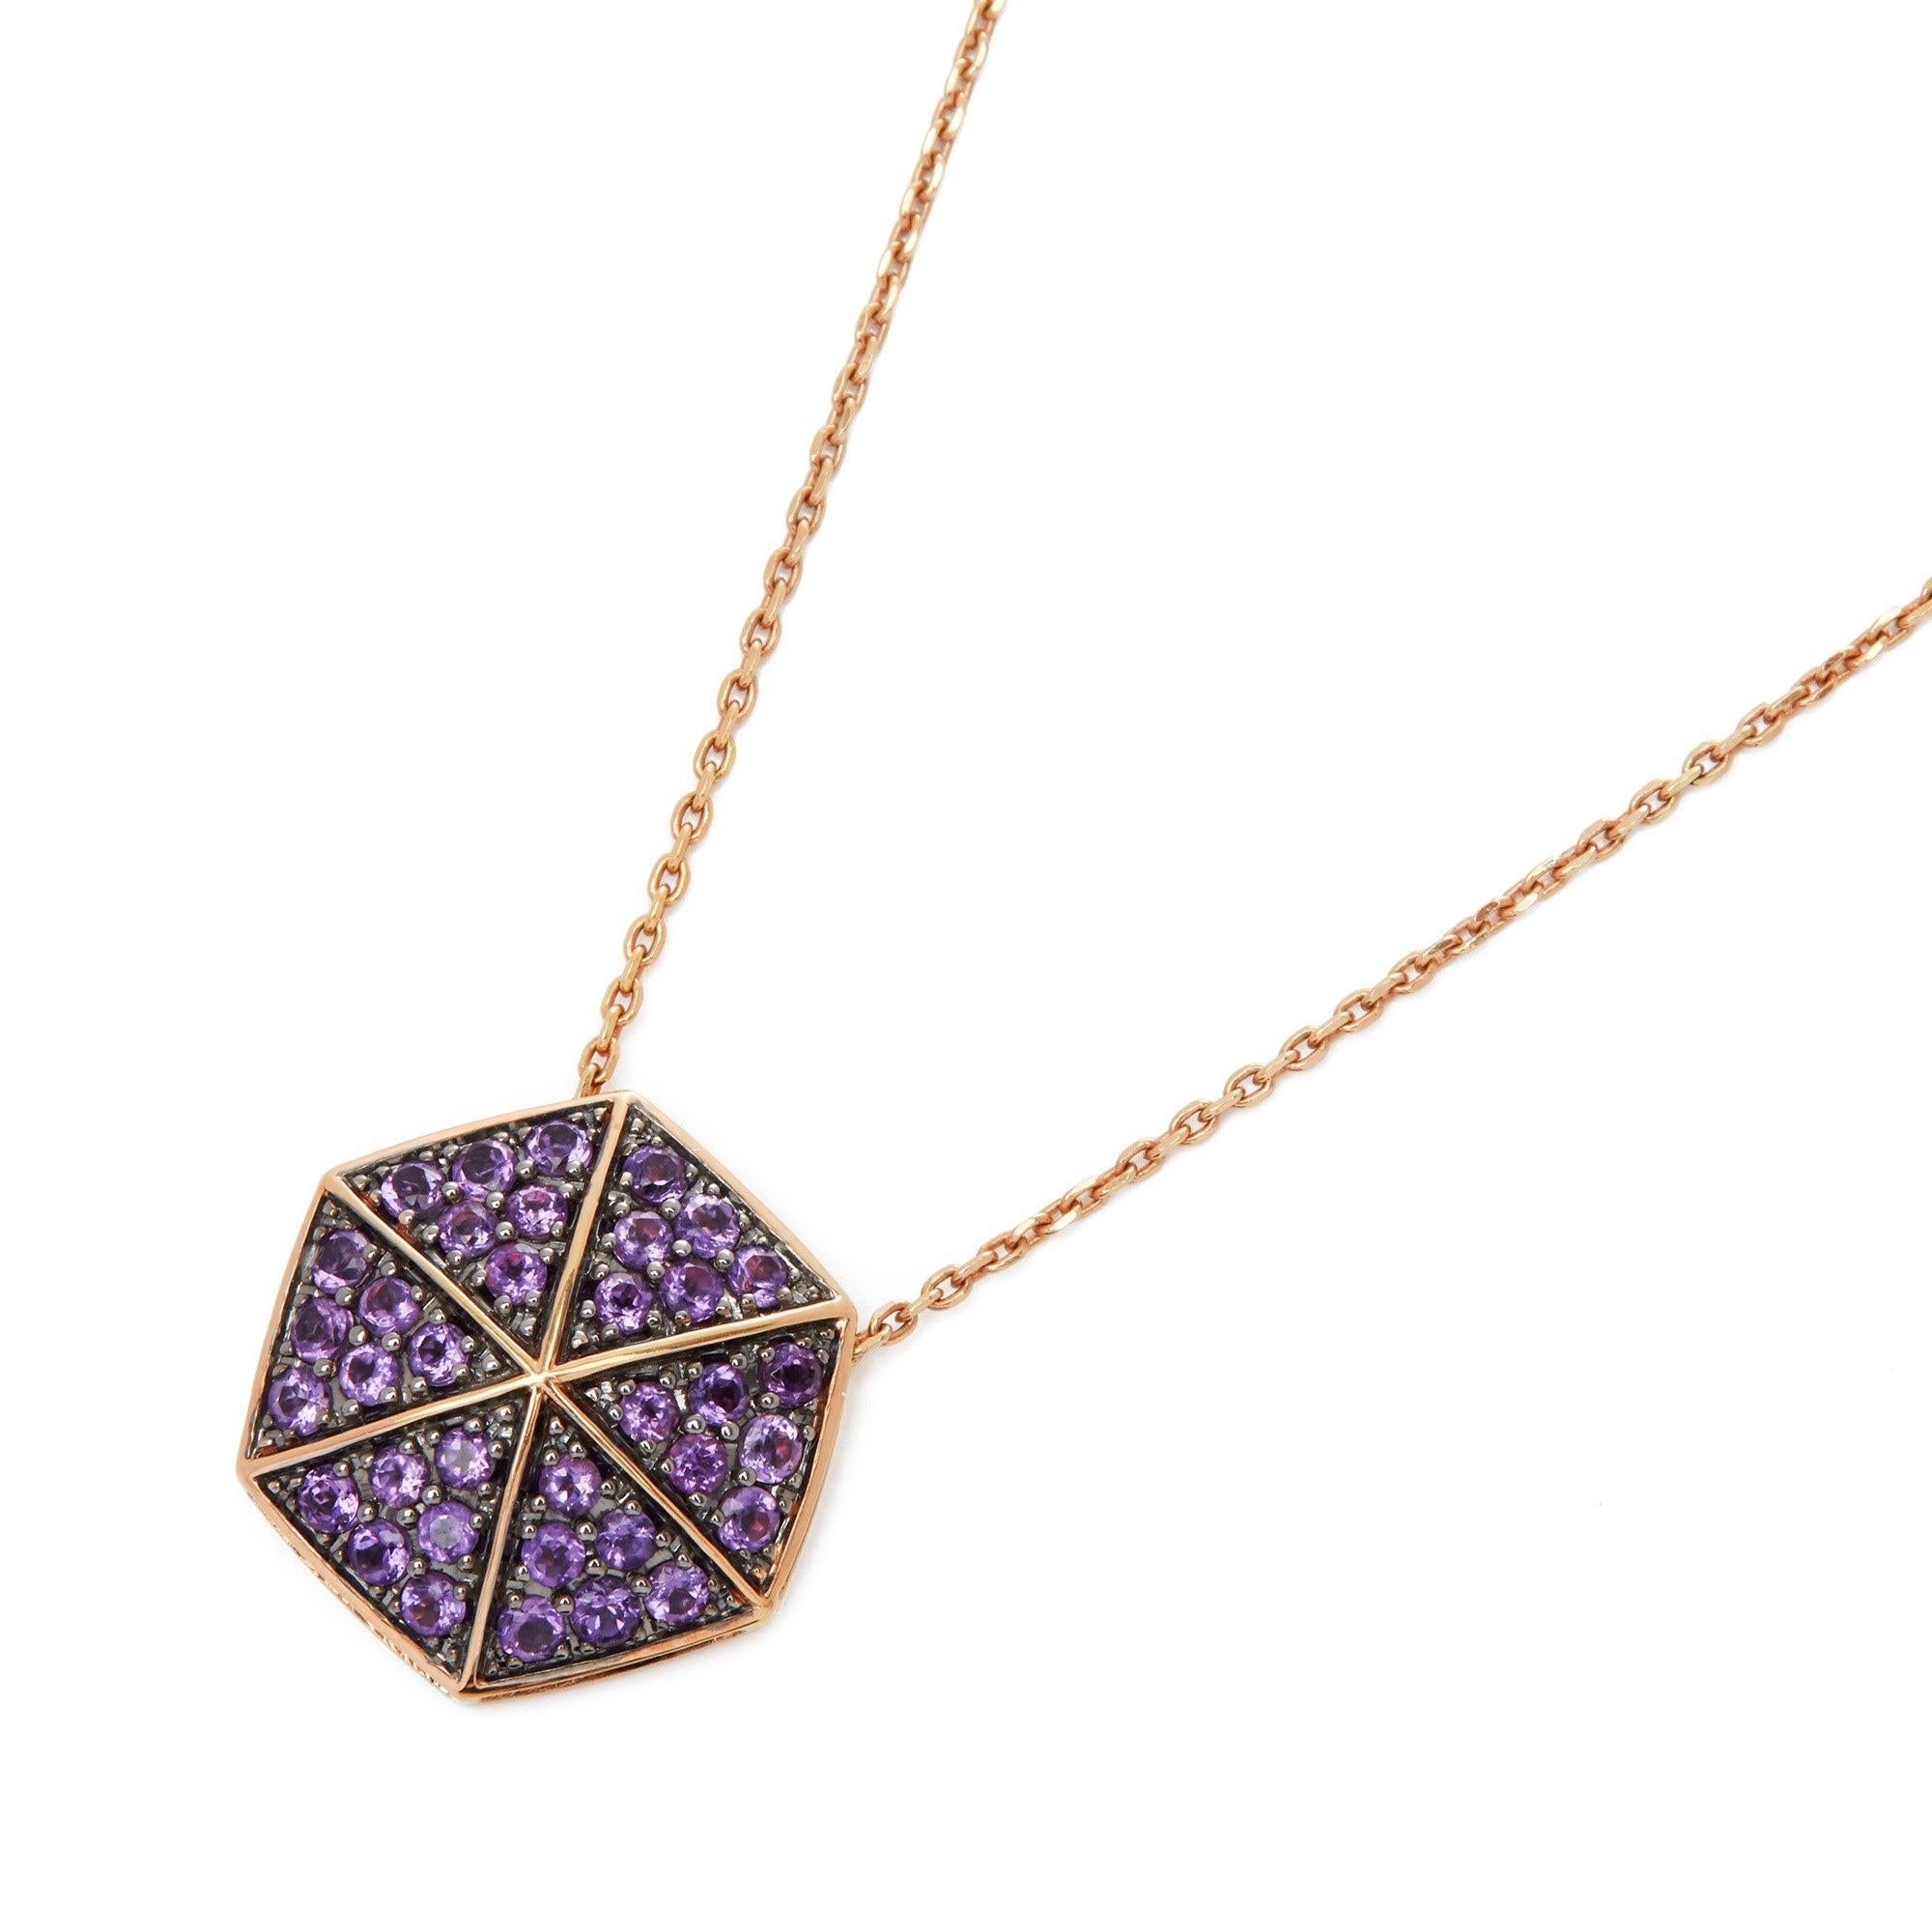 This Pendant by Stephen Webster is from his Deco Collection and features Six Pave Round Amethyst set sections with a total of Thirty Six stones forming a Hexagonal shape. Set in 18k Rose Gold with 41cm Trace Link Chain. 